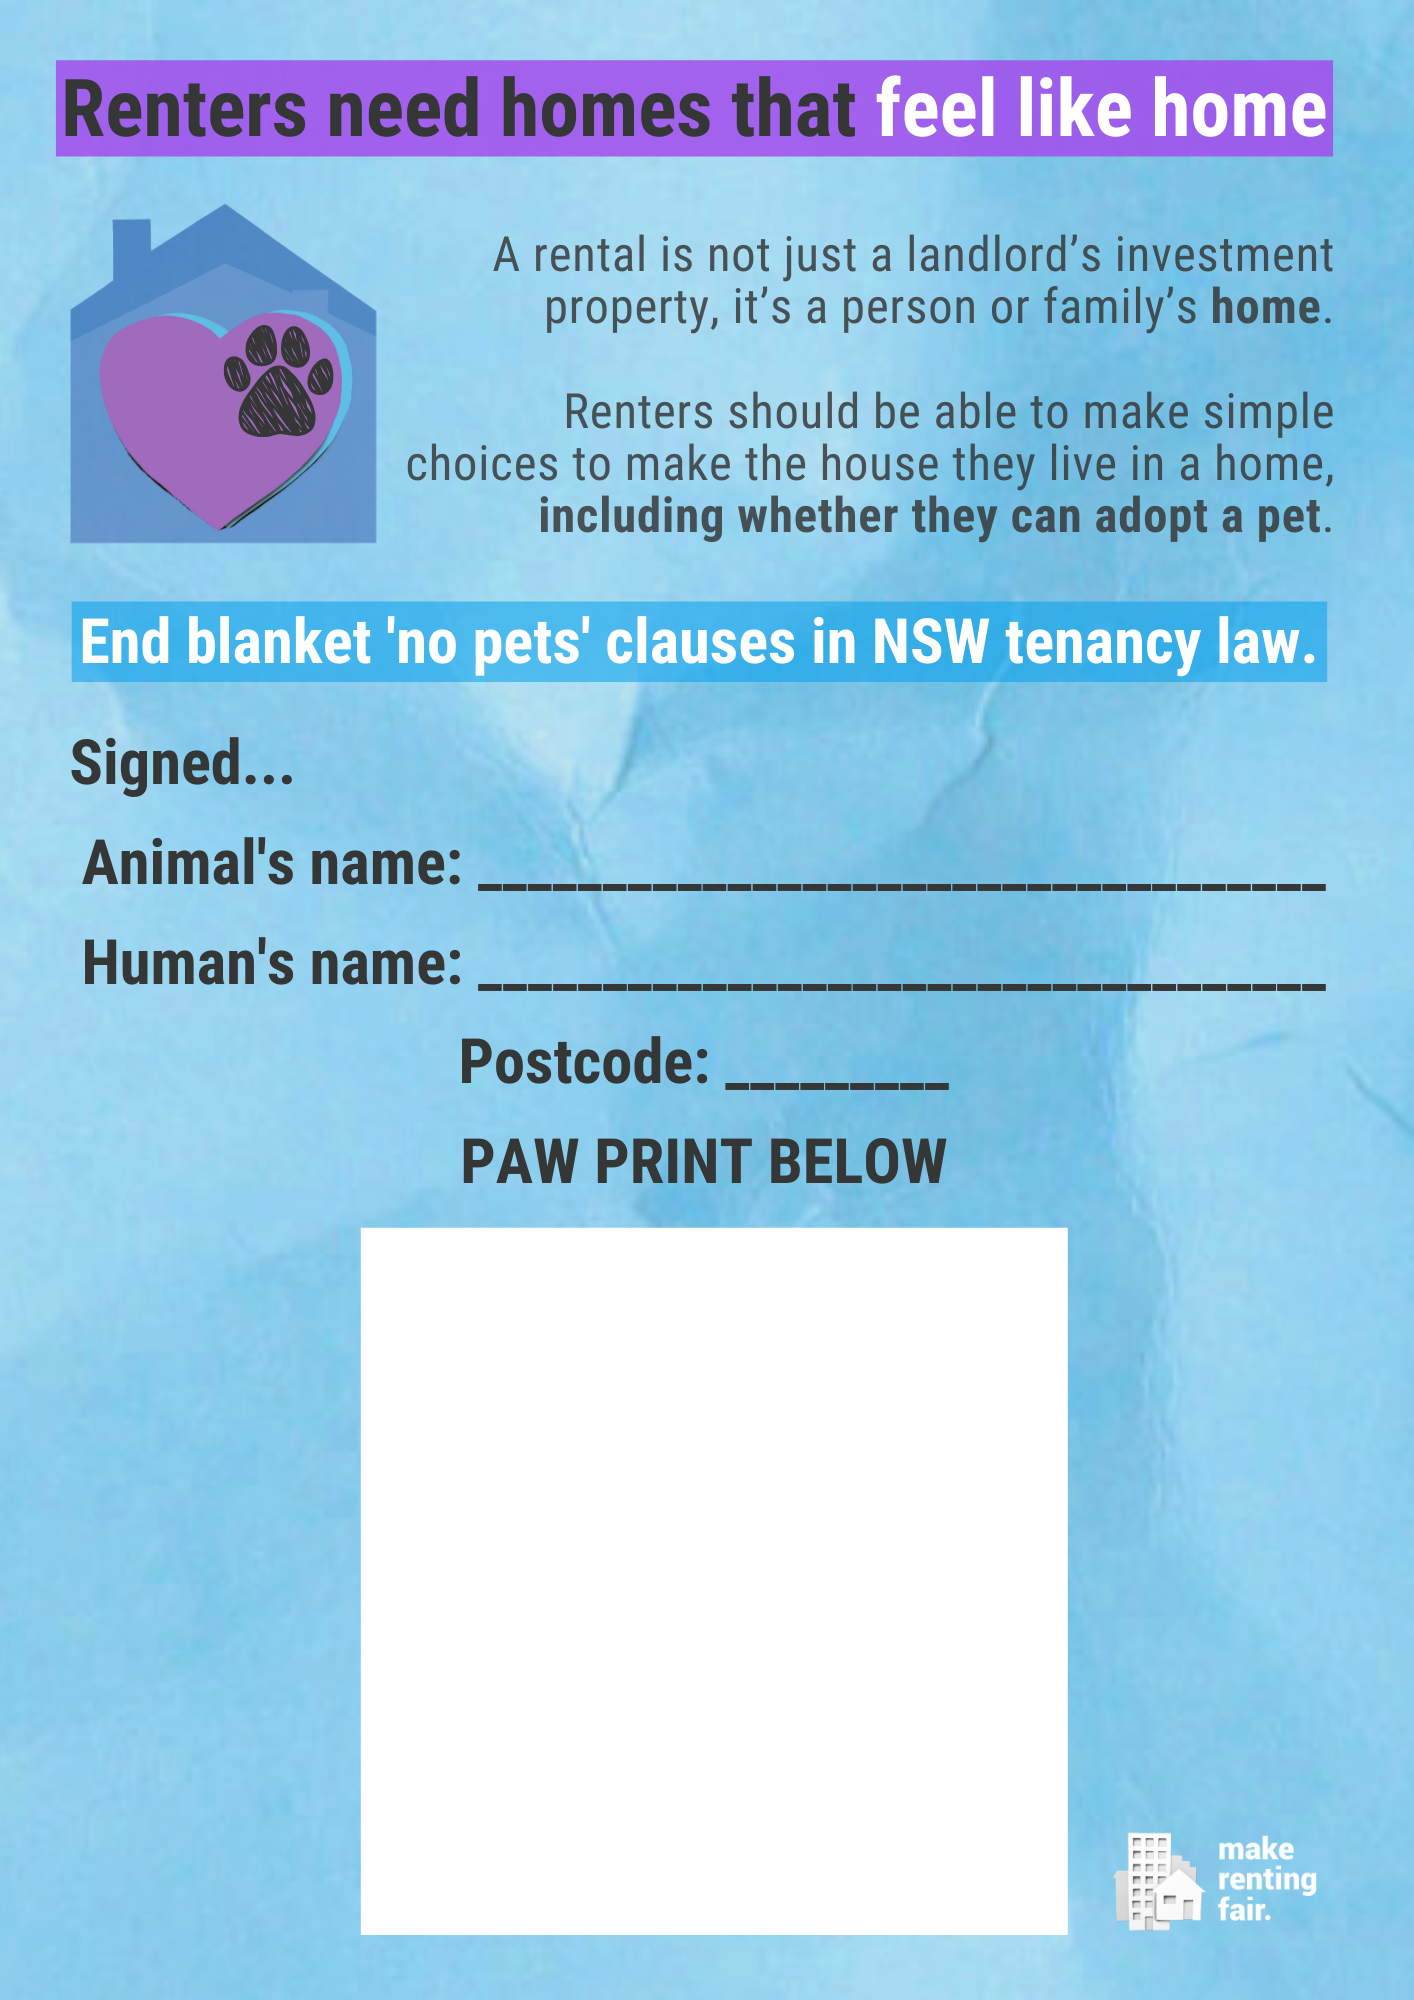 End blanket 'no pets' clauses in NSW tenancy law pet sign on